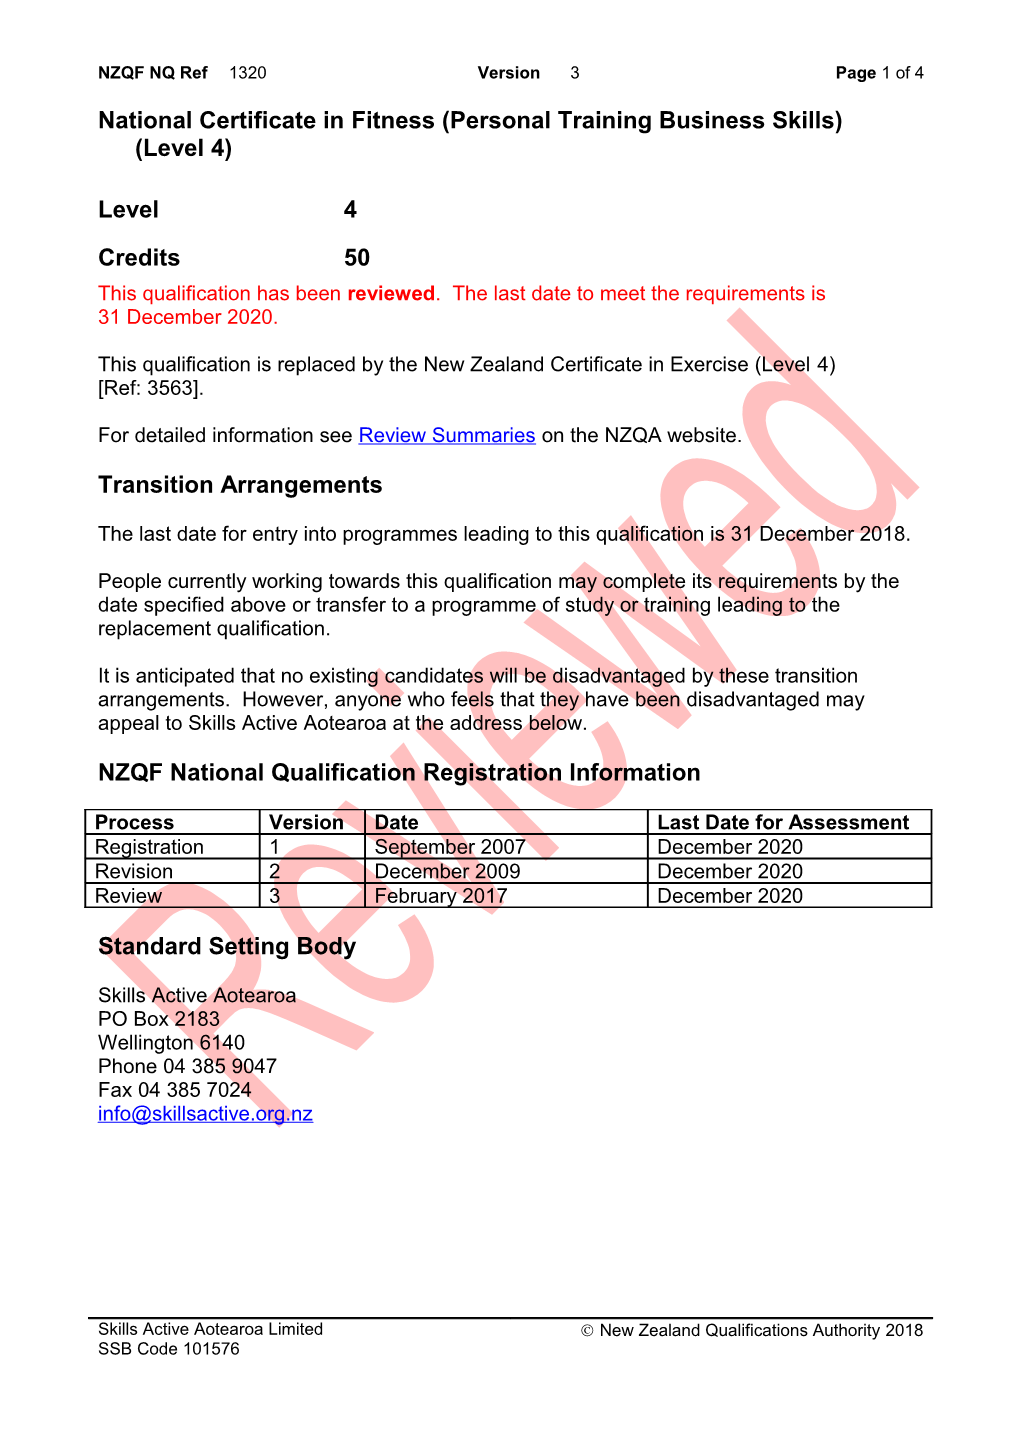 1320 National Certificate in Fitness (Personal Training Business Skills) (Level 4)